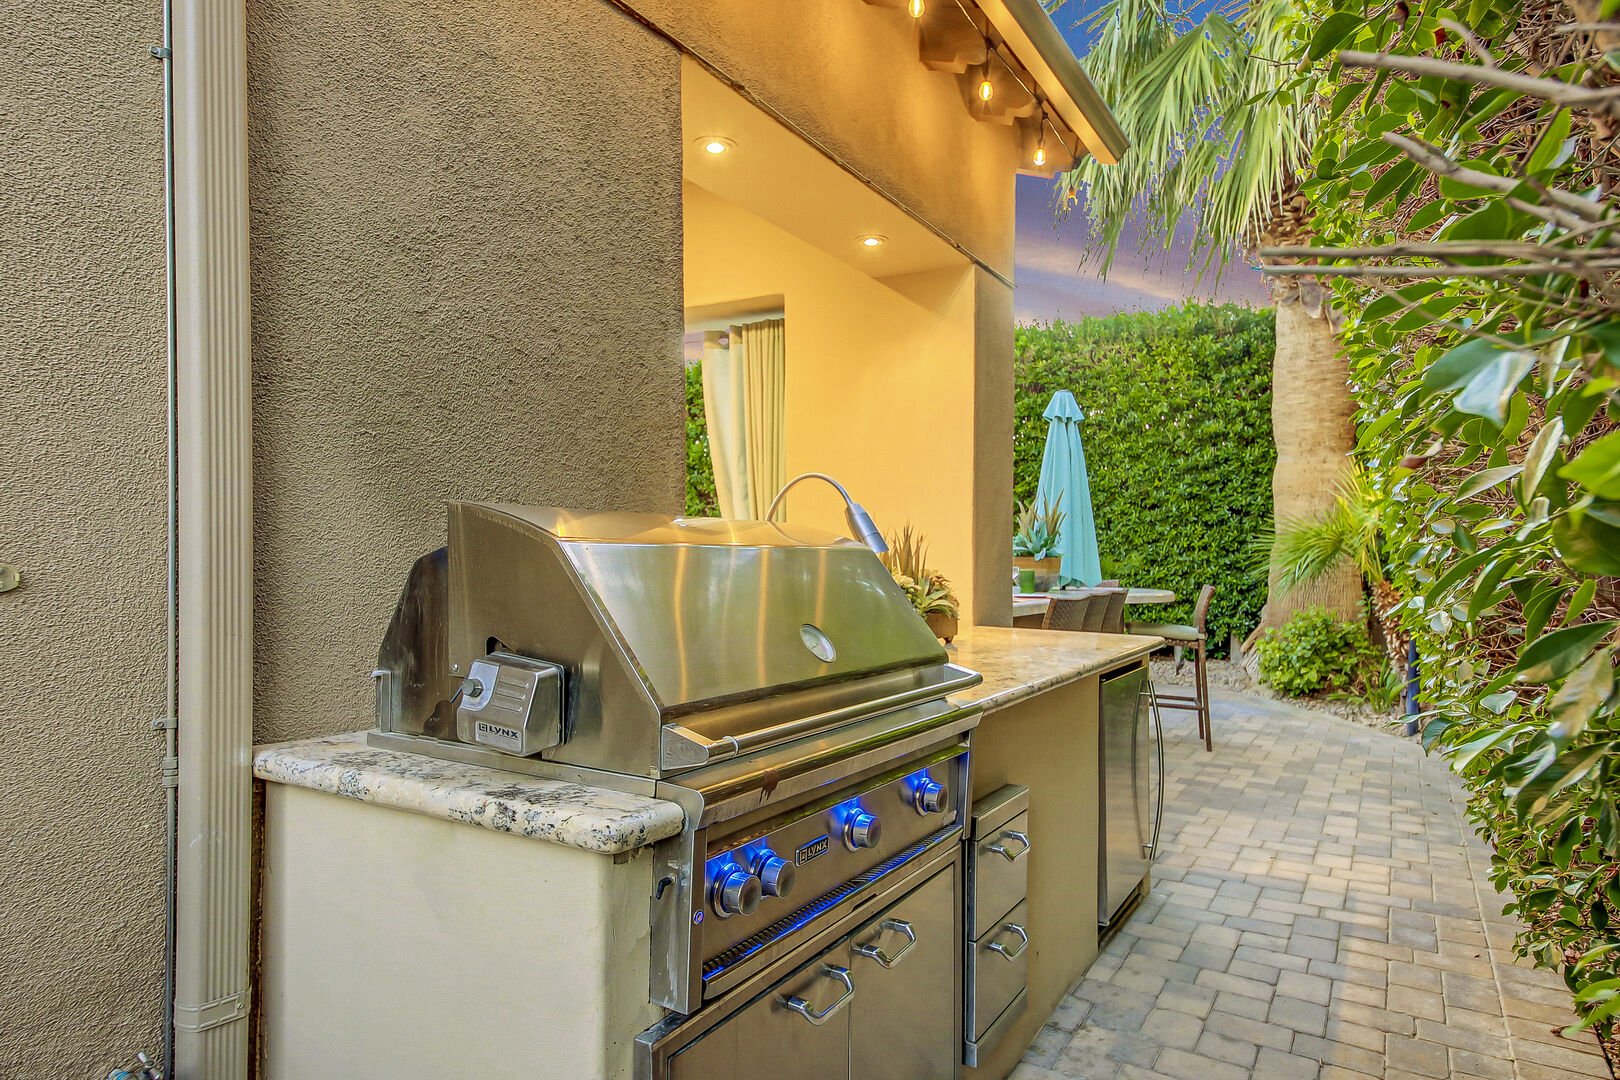 You will have access to the natural gas built-in BBQ.